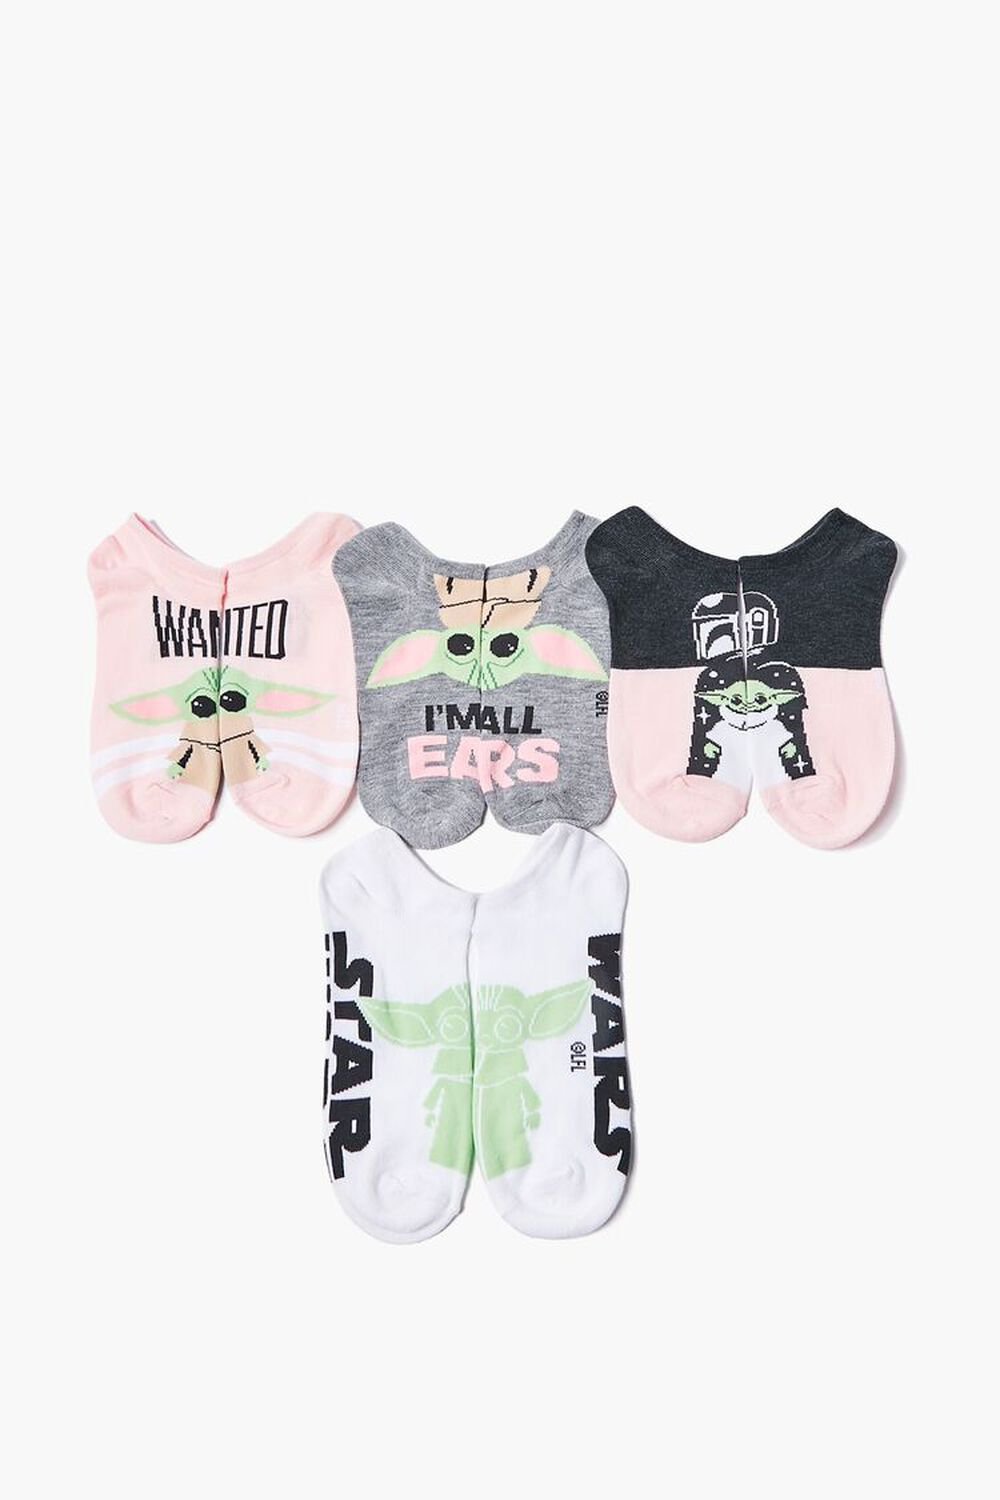 PINK/MULTI Baby Yoda Graphic Ankle Socks - 5 Pack, image 1